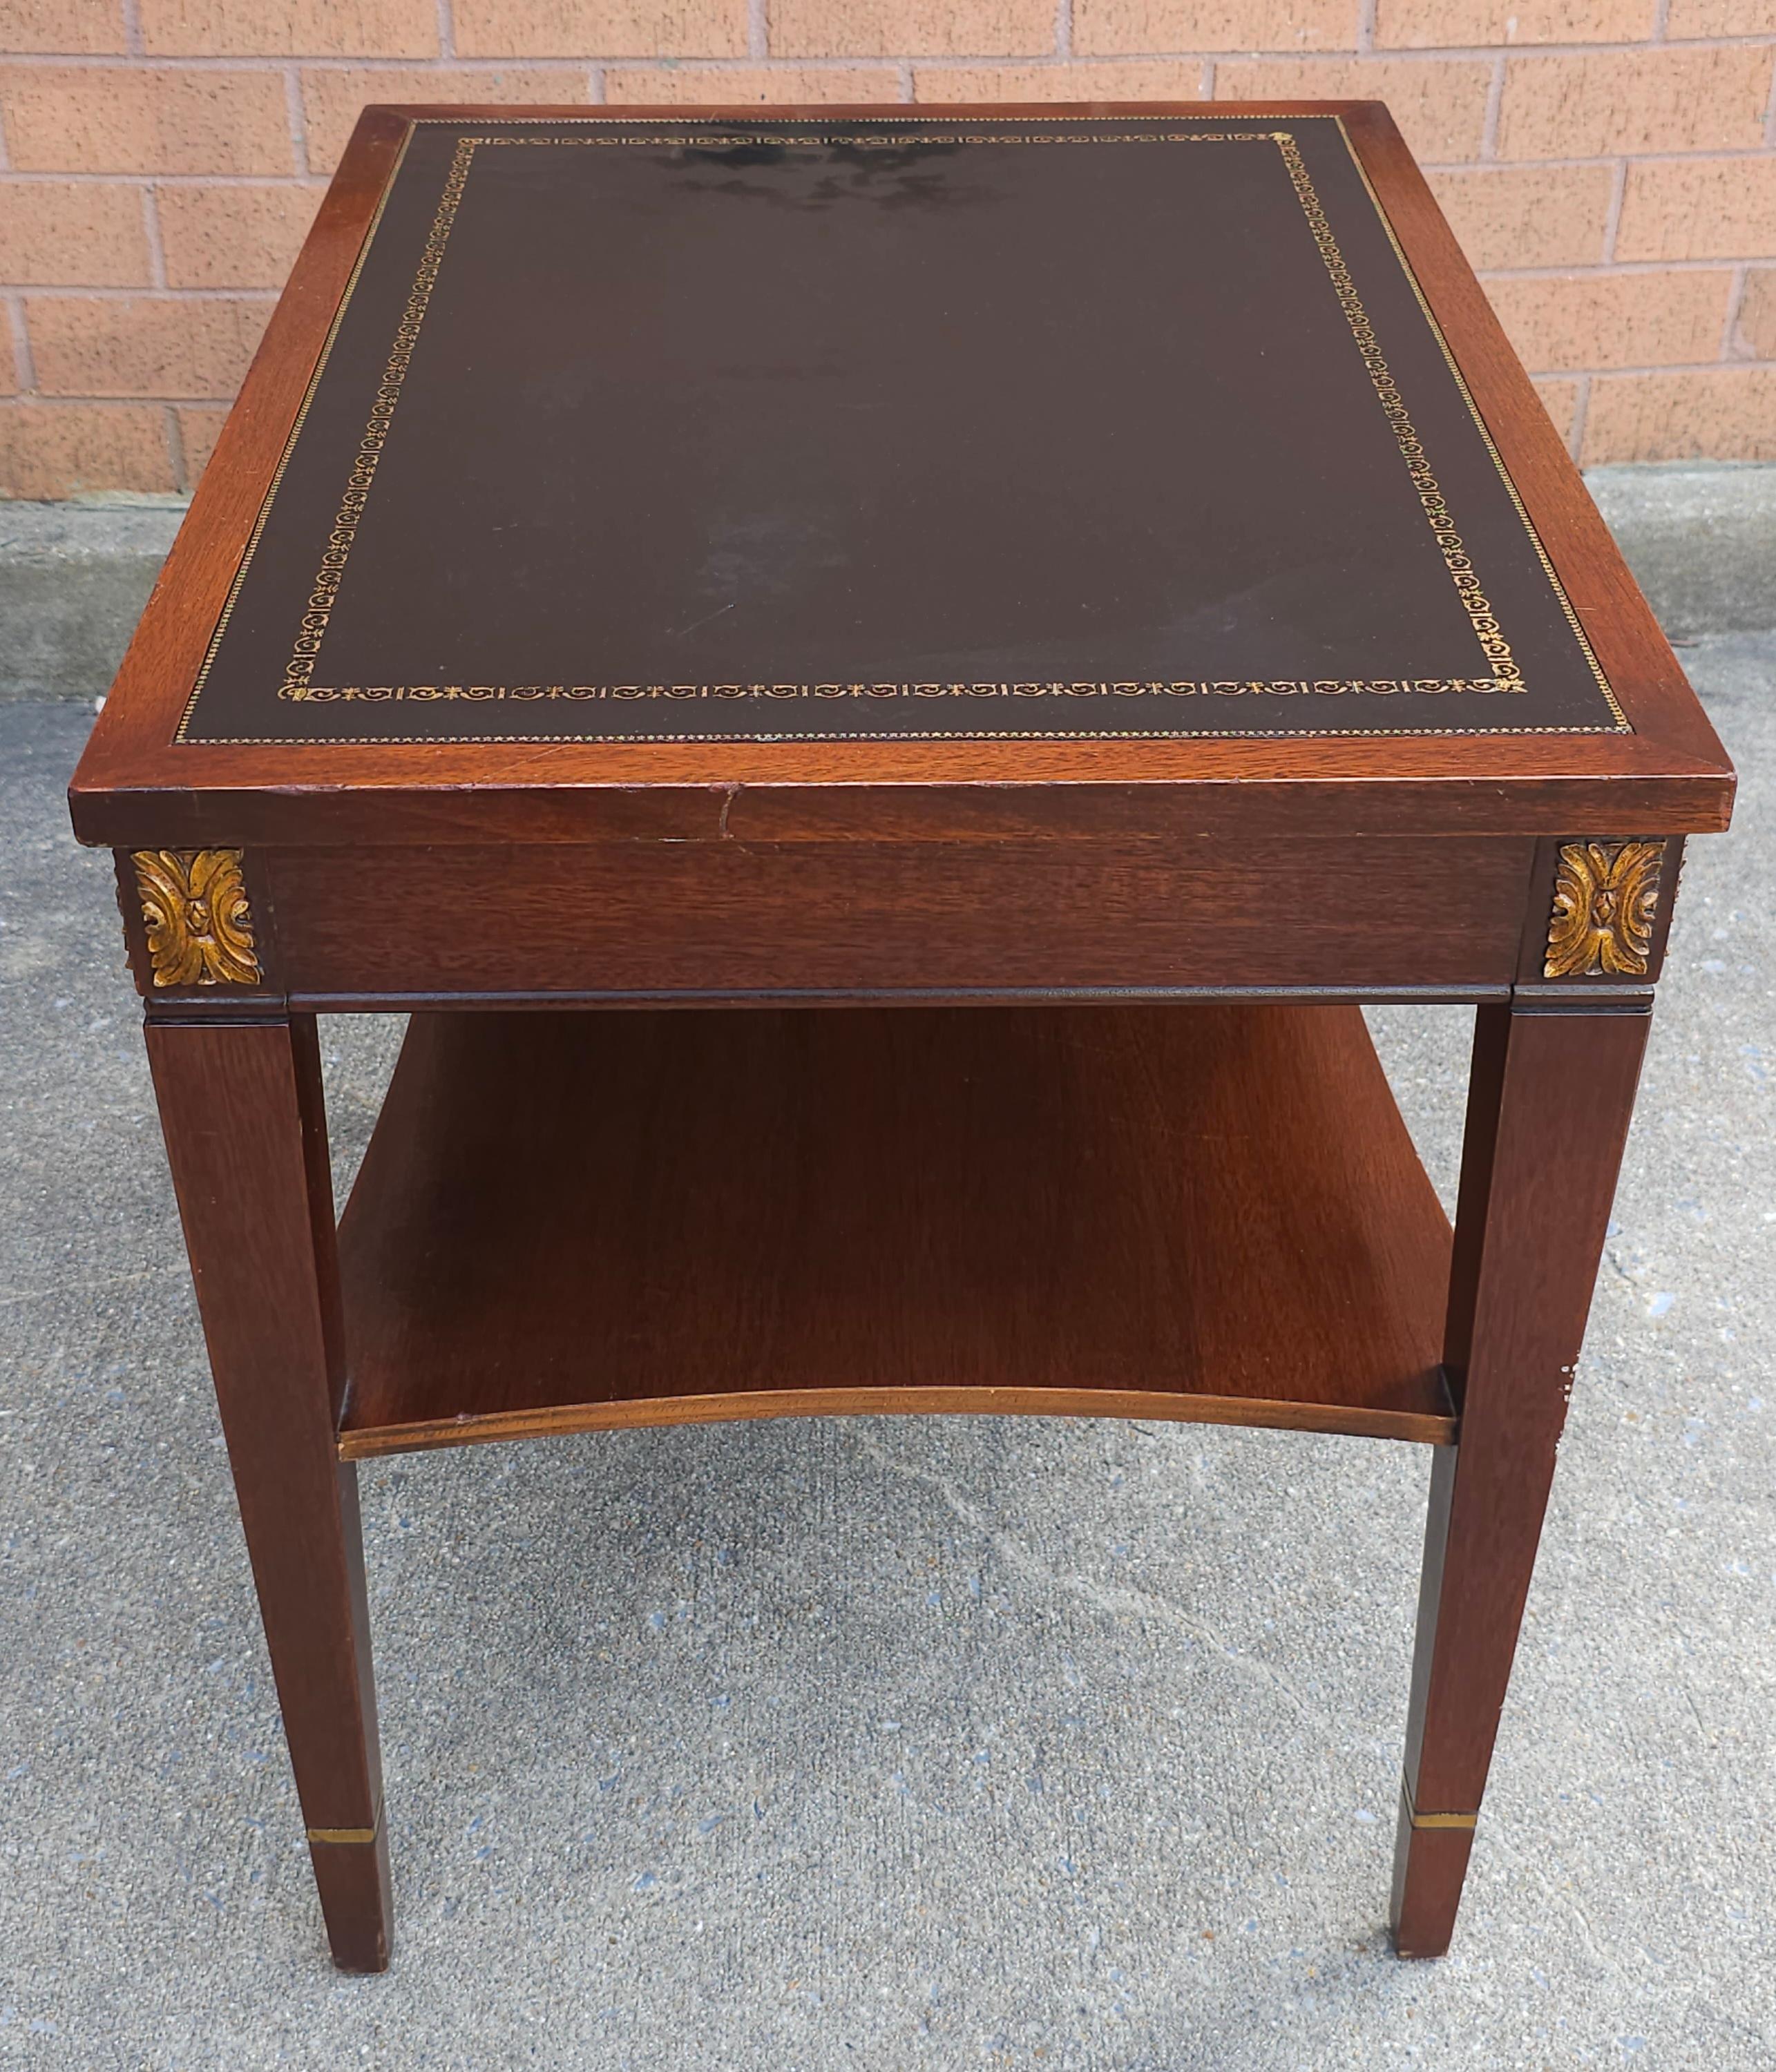 American Brandt Furniture Partial Gilt And Tooled Leather Mahogany Tiered Side Table For Sale